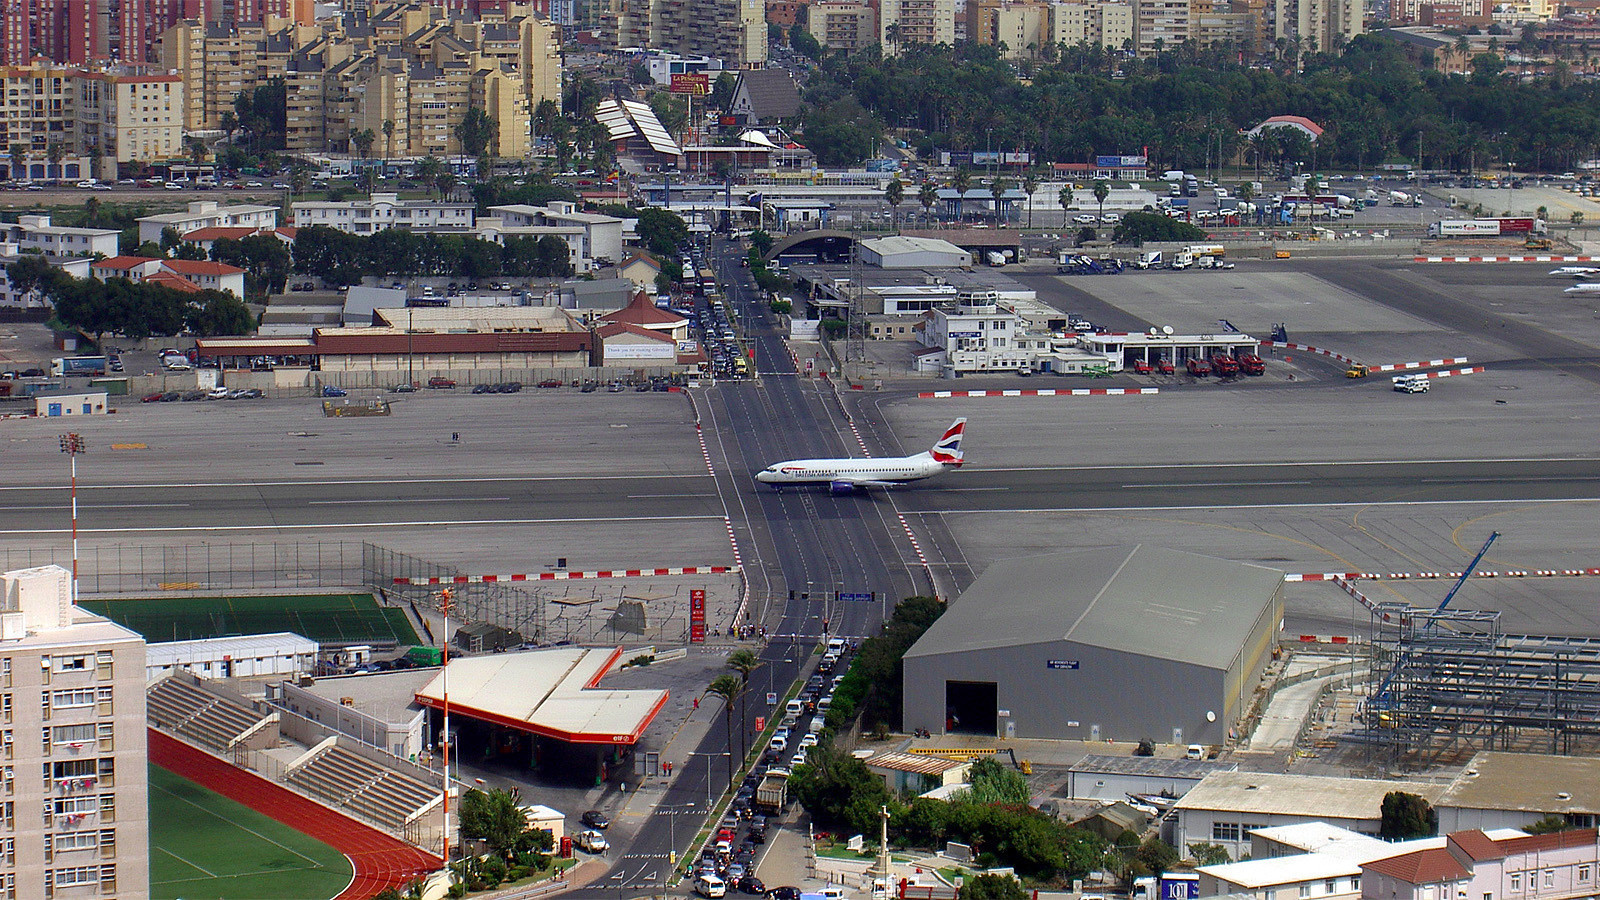 The runway at the Gibraltar International Airport has a regular road crossing through it.